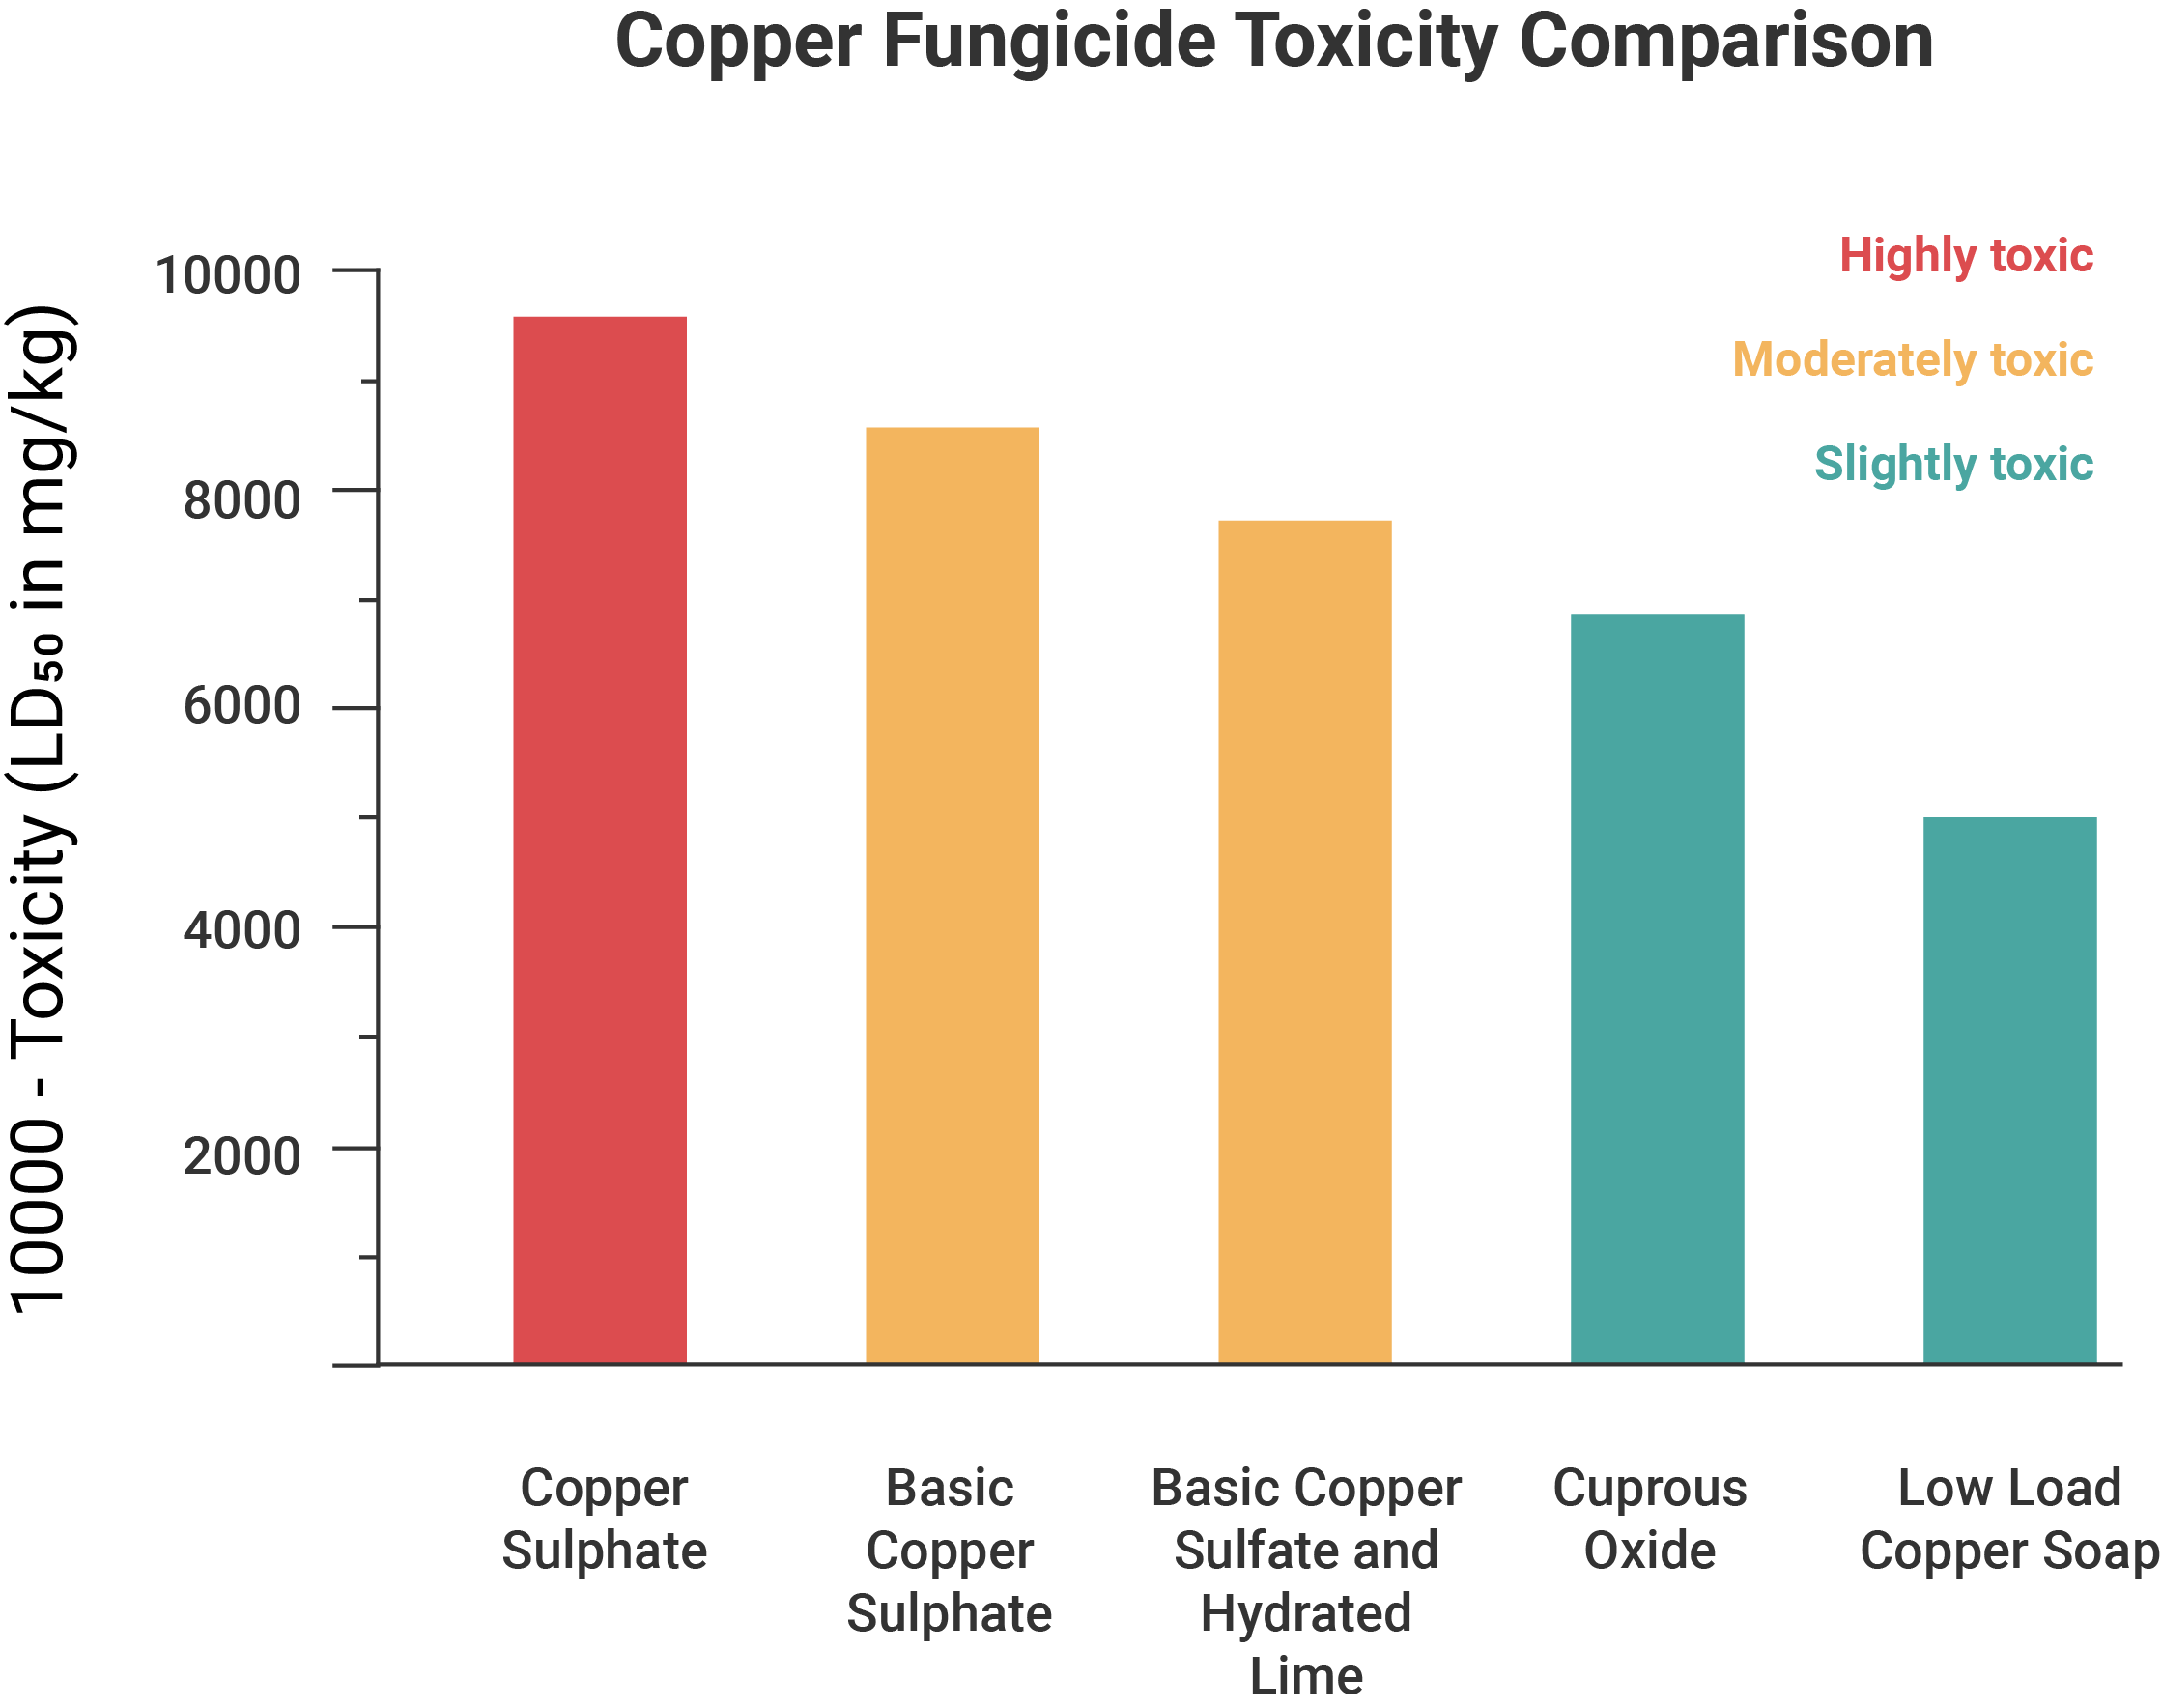 A graph comparing acute toxicity of five copper fungicides (copper sulphate, basic copper sulphate, basic copper sulphate and hydrated lime, cuprous oxide, and low load copper soap).